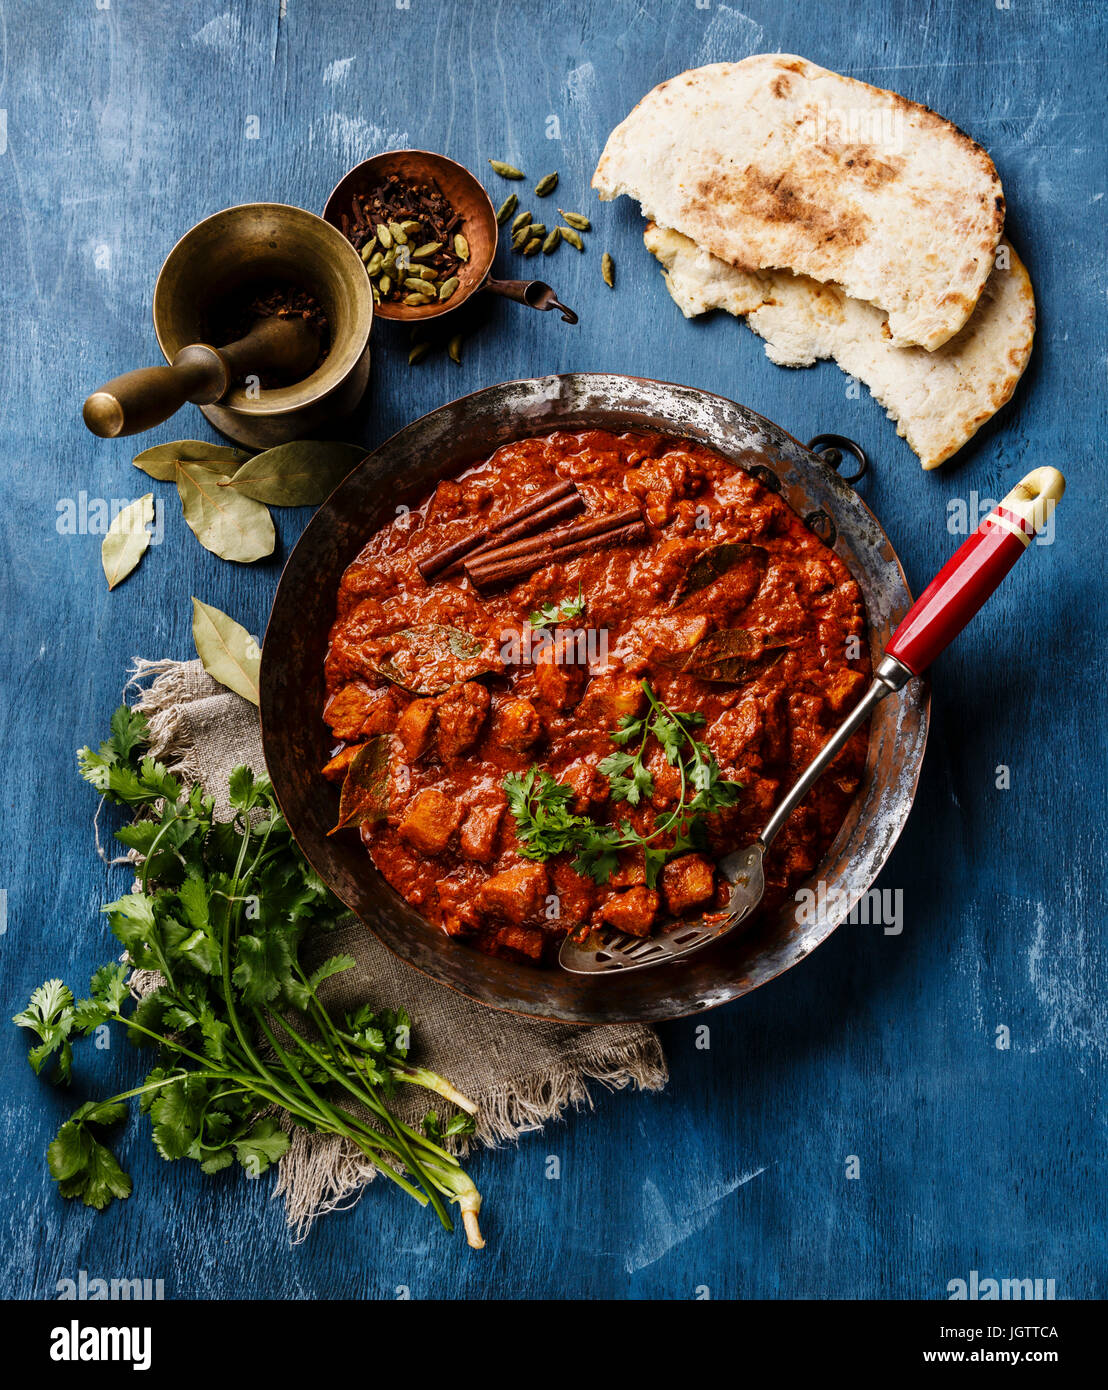 Chicken tikka masala spicy Indian curry in a copper pan on blue wooden background Stock Photo